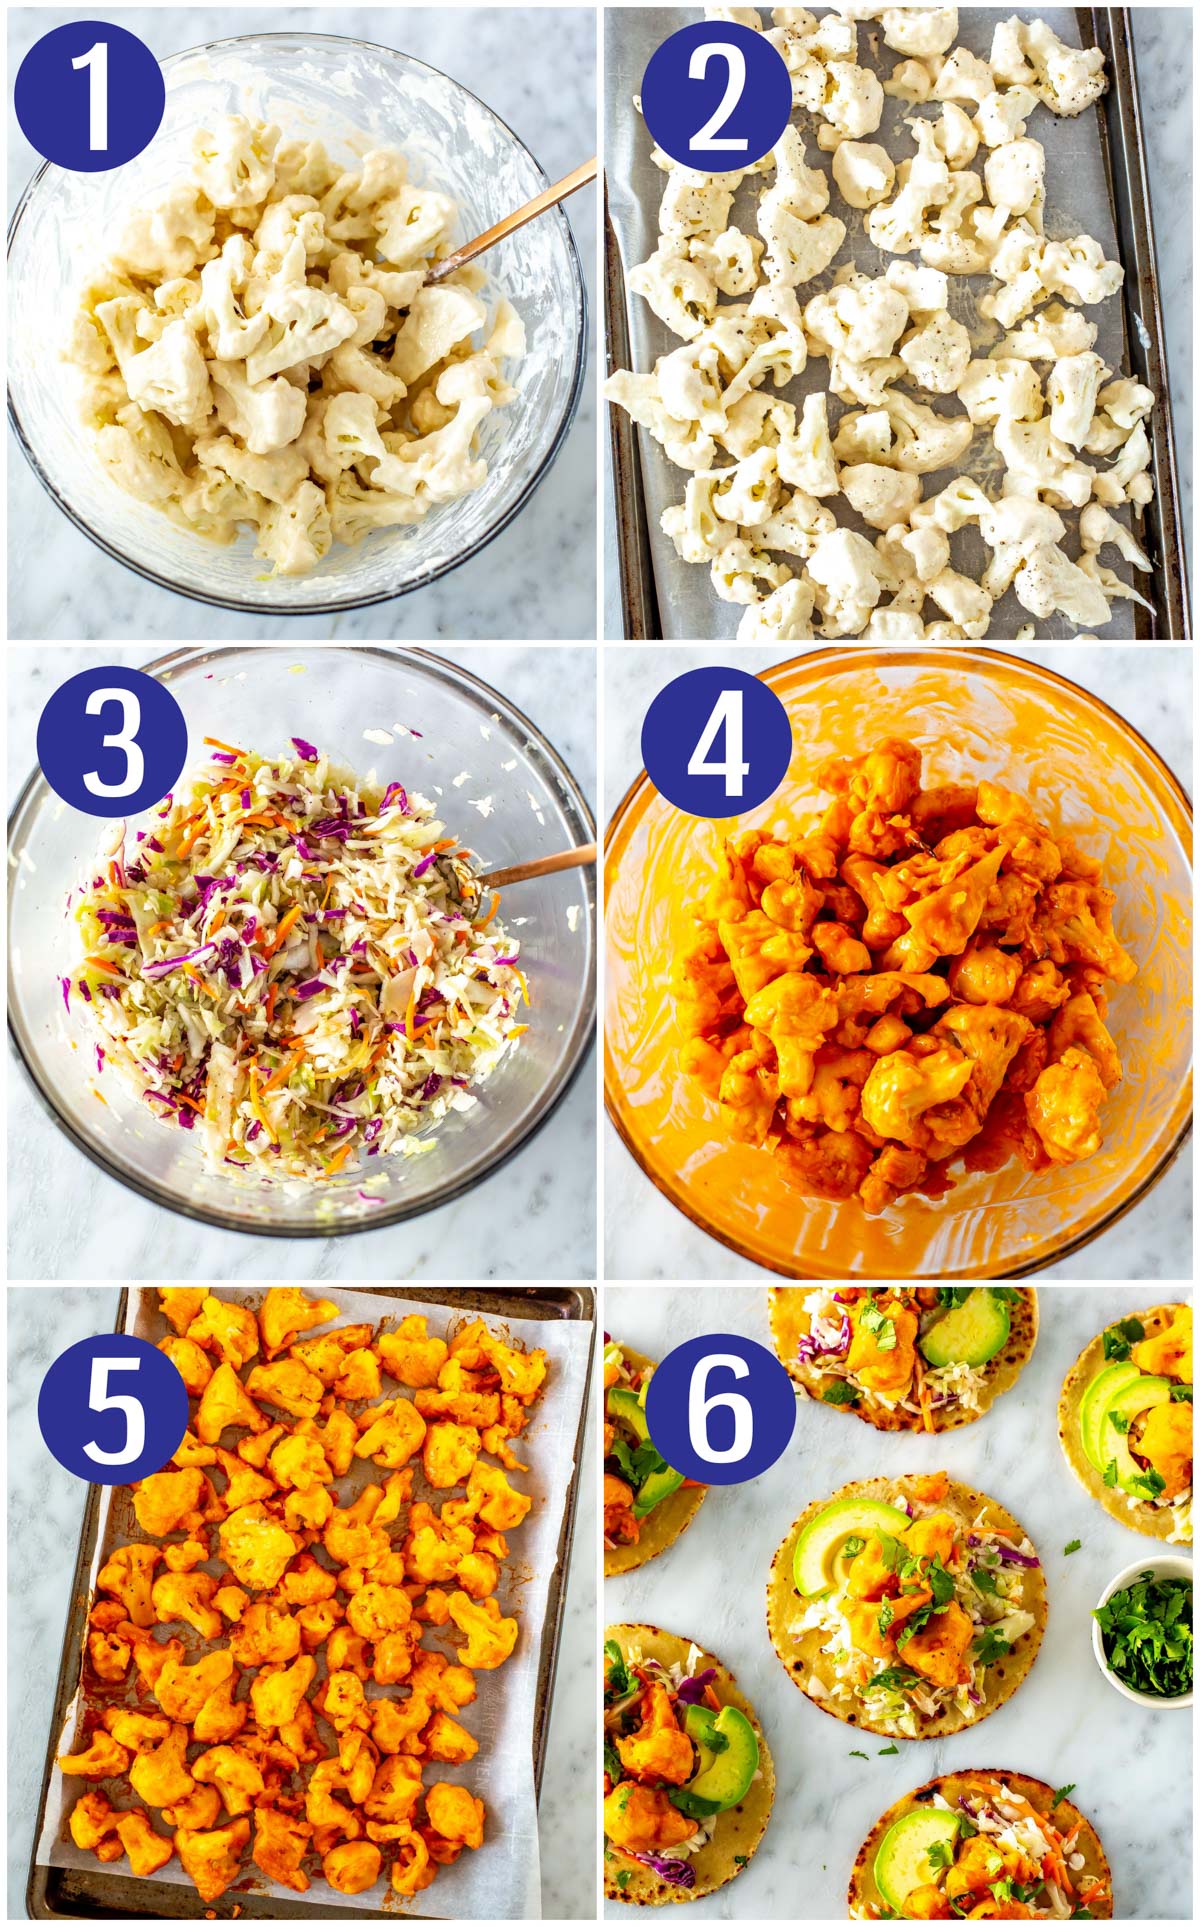 Step by step instructions collage for buffalo cauliflower tacos: coat cauliflower in water flour mixture, bake, make coleslaw, coat baked cauliflower in buffalo sauce, bake again, serve in tacos.